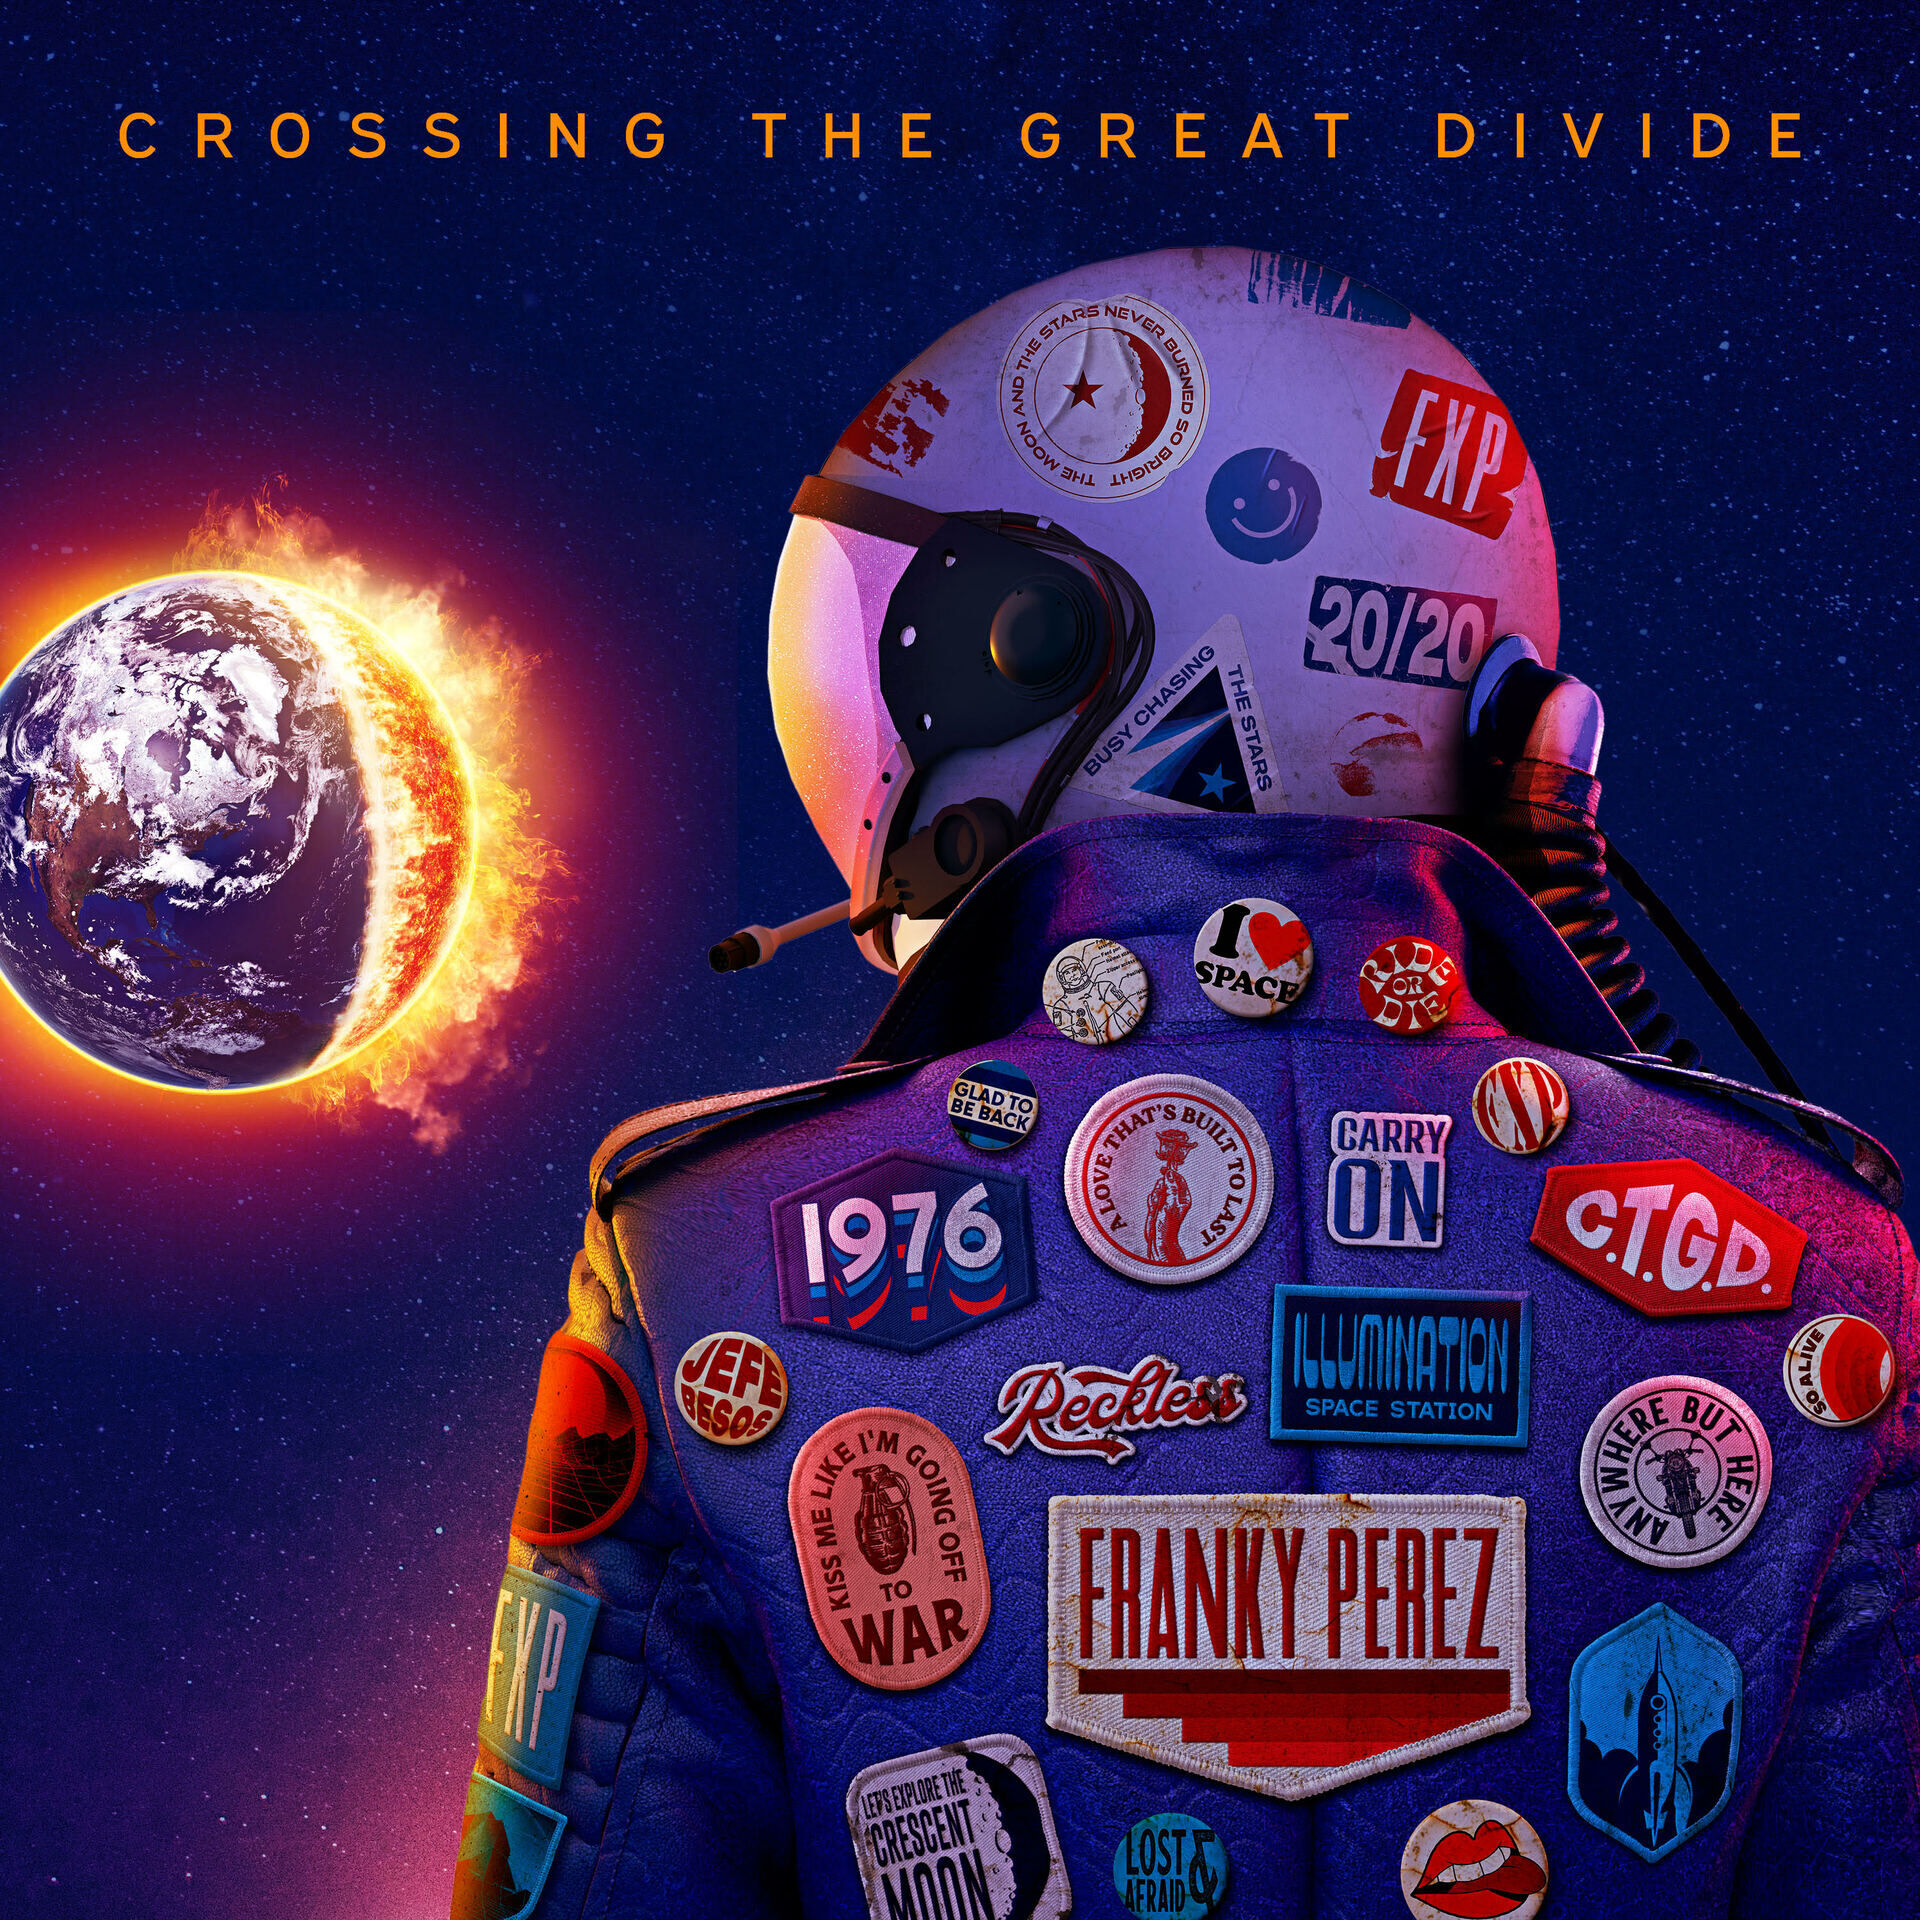 FRANKY PEREZ - Crossing The Great Divide [CD]